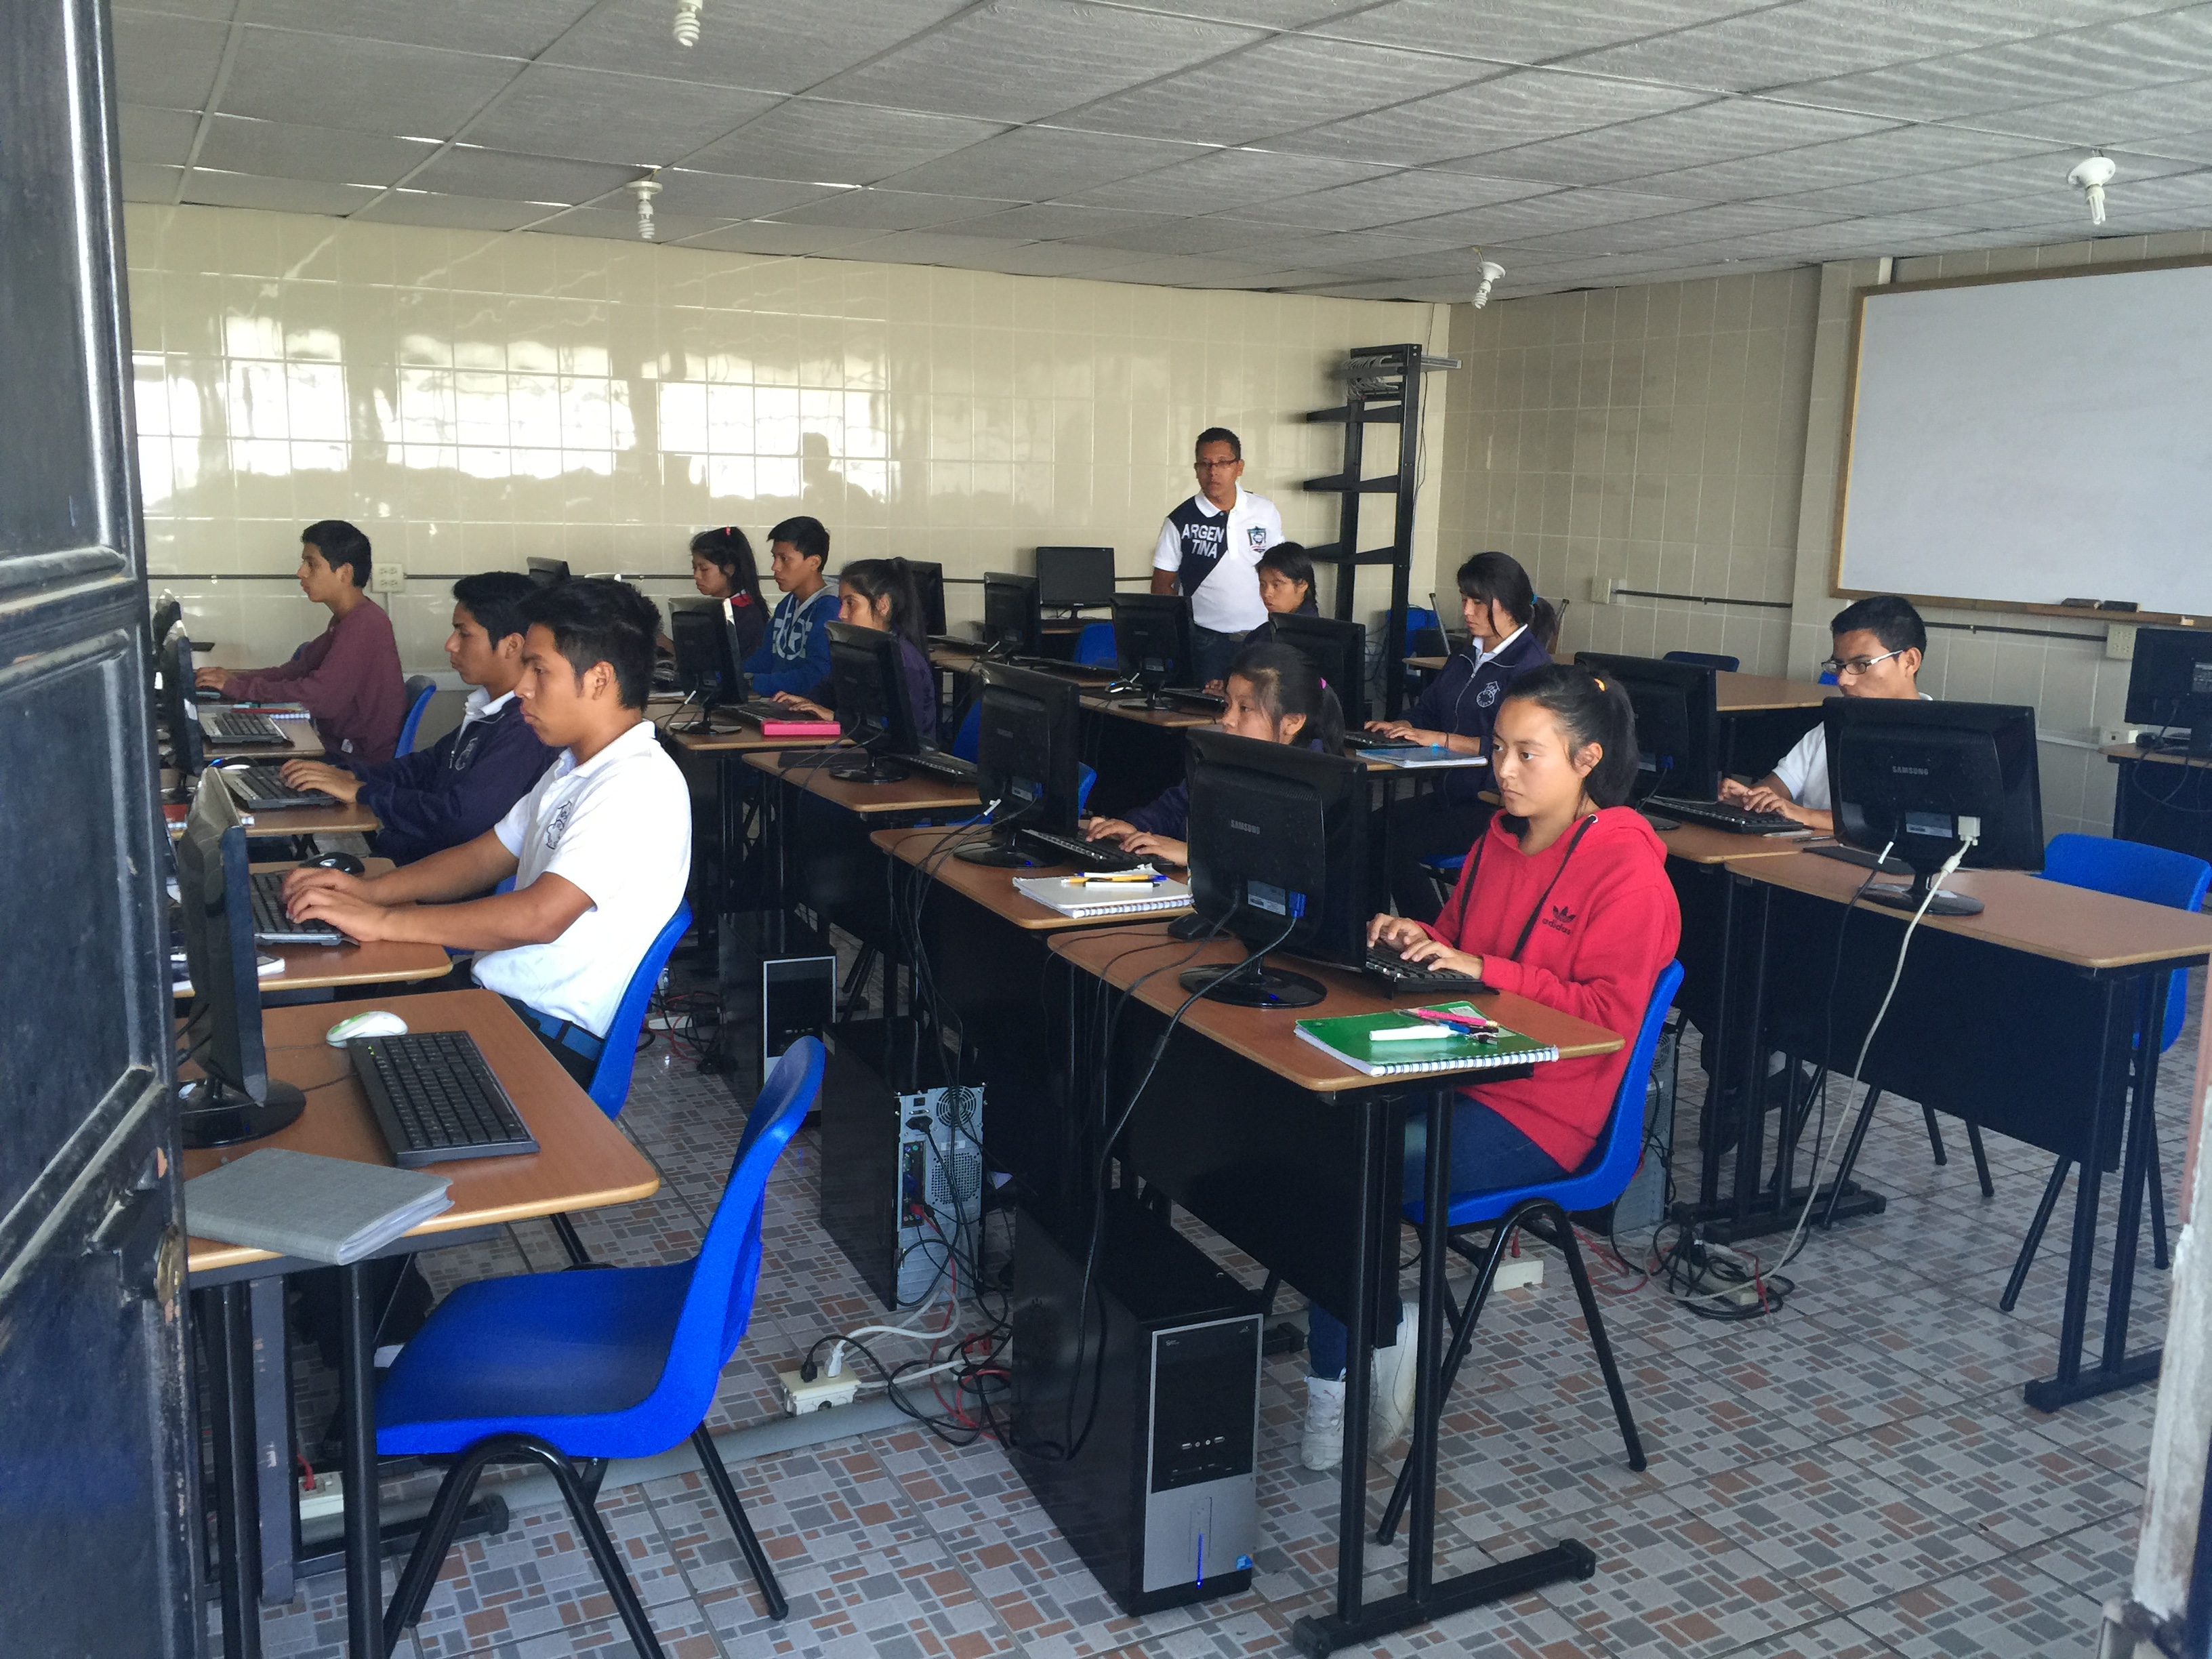 The computer class